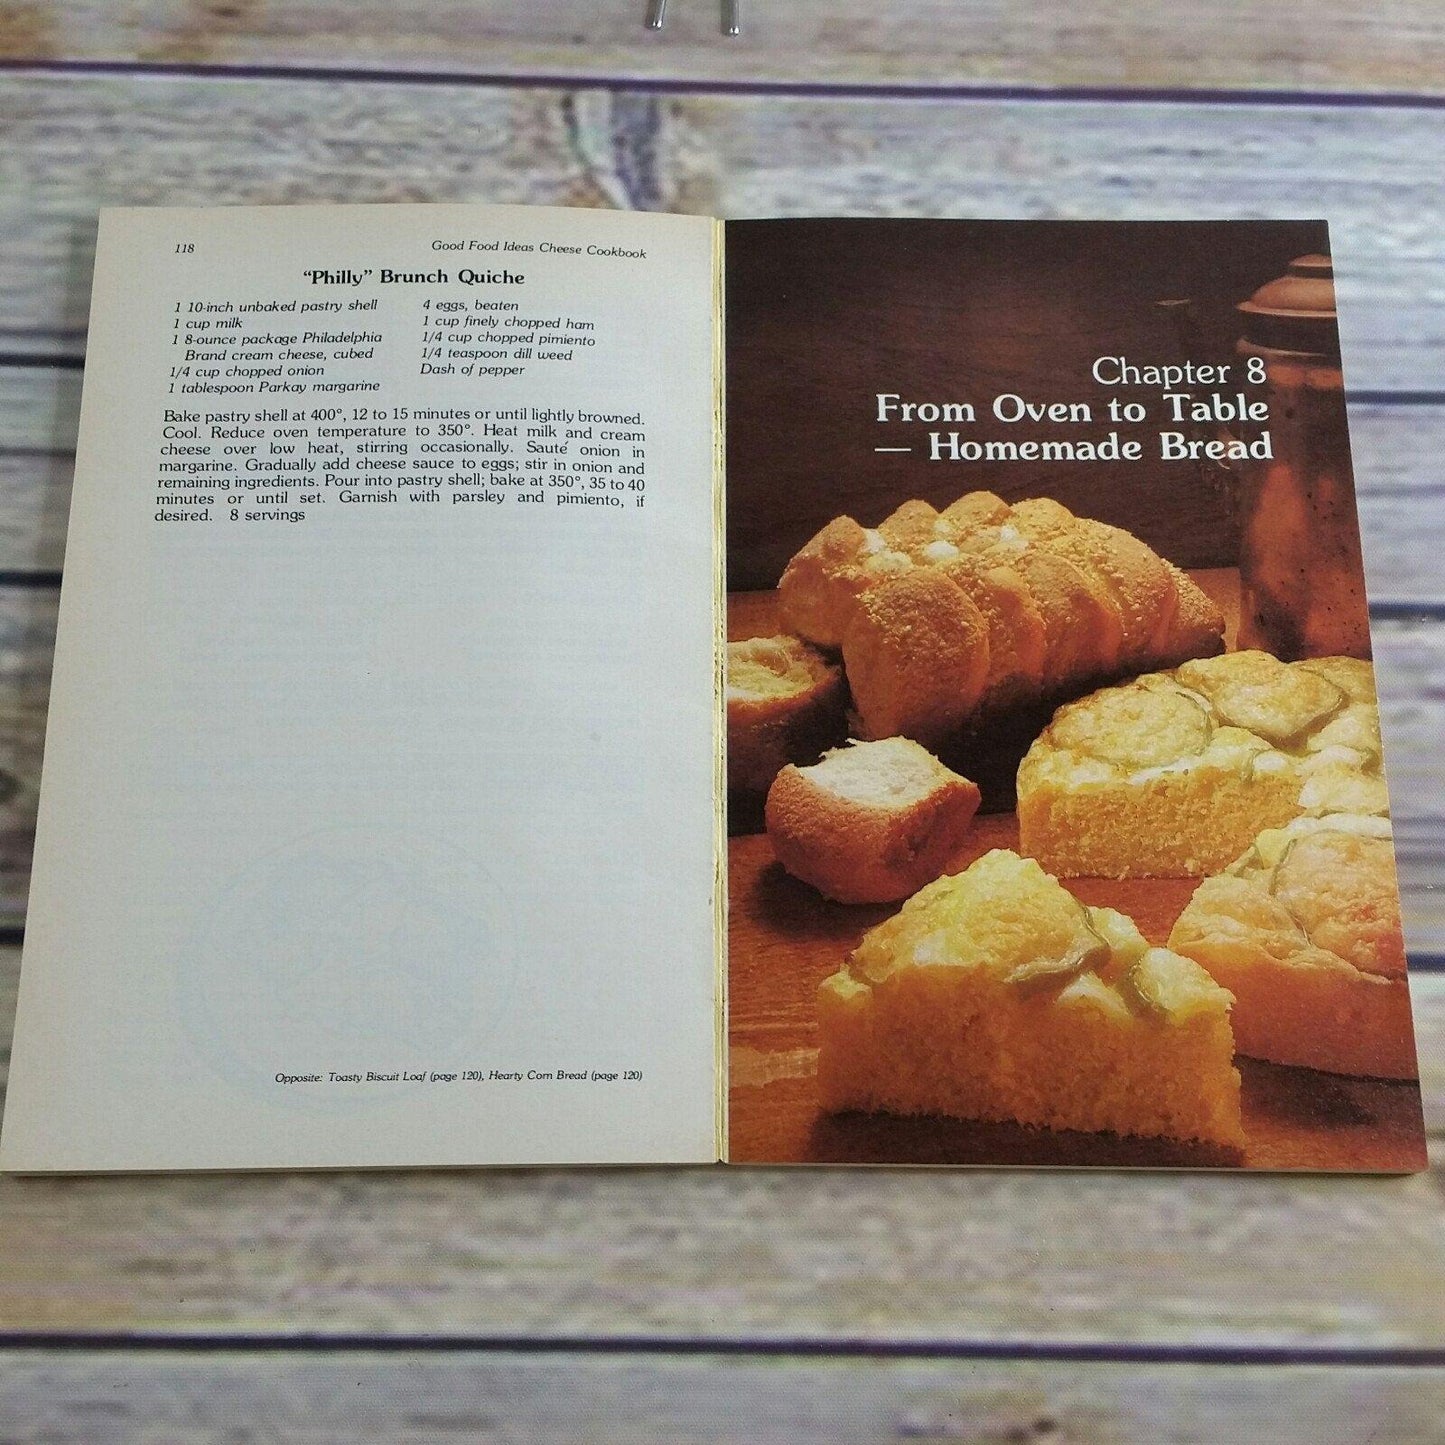 Vintage Cookbook Kraft Cheese Good Food Ideas 1977 Promo Cheese Recipes Paperback First Printing